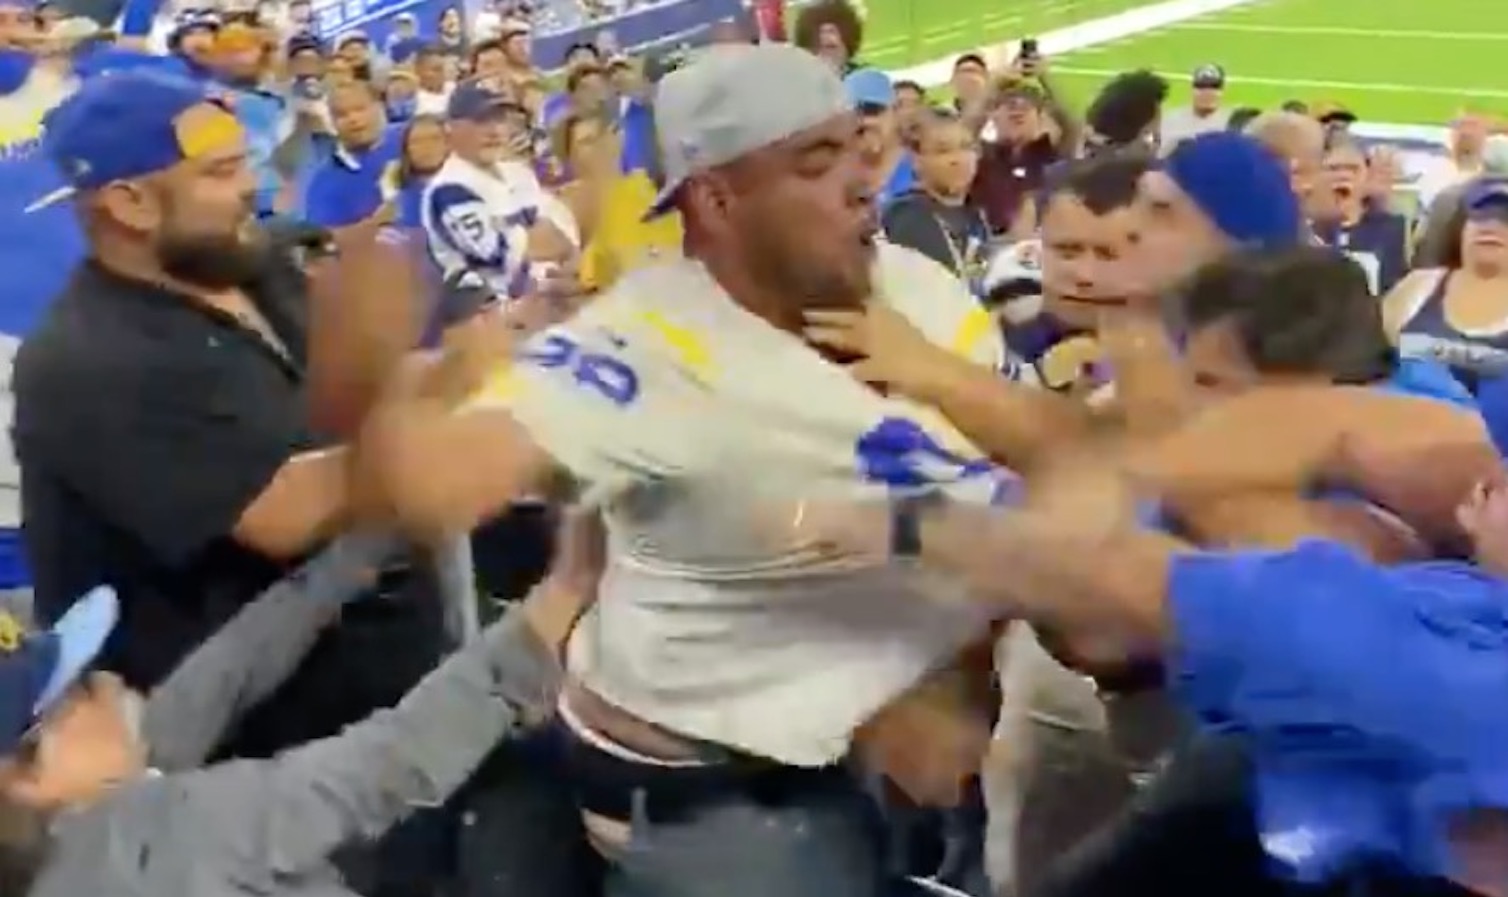 Rams-Chargers game features insane brawl between fans at SoFi